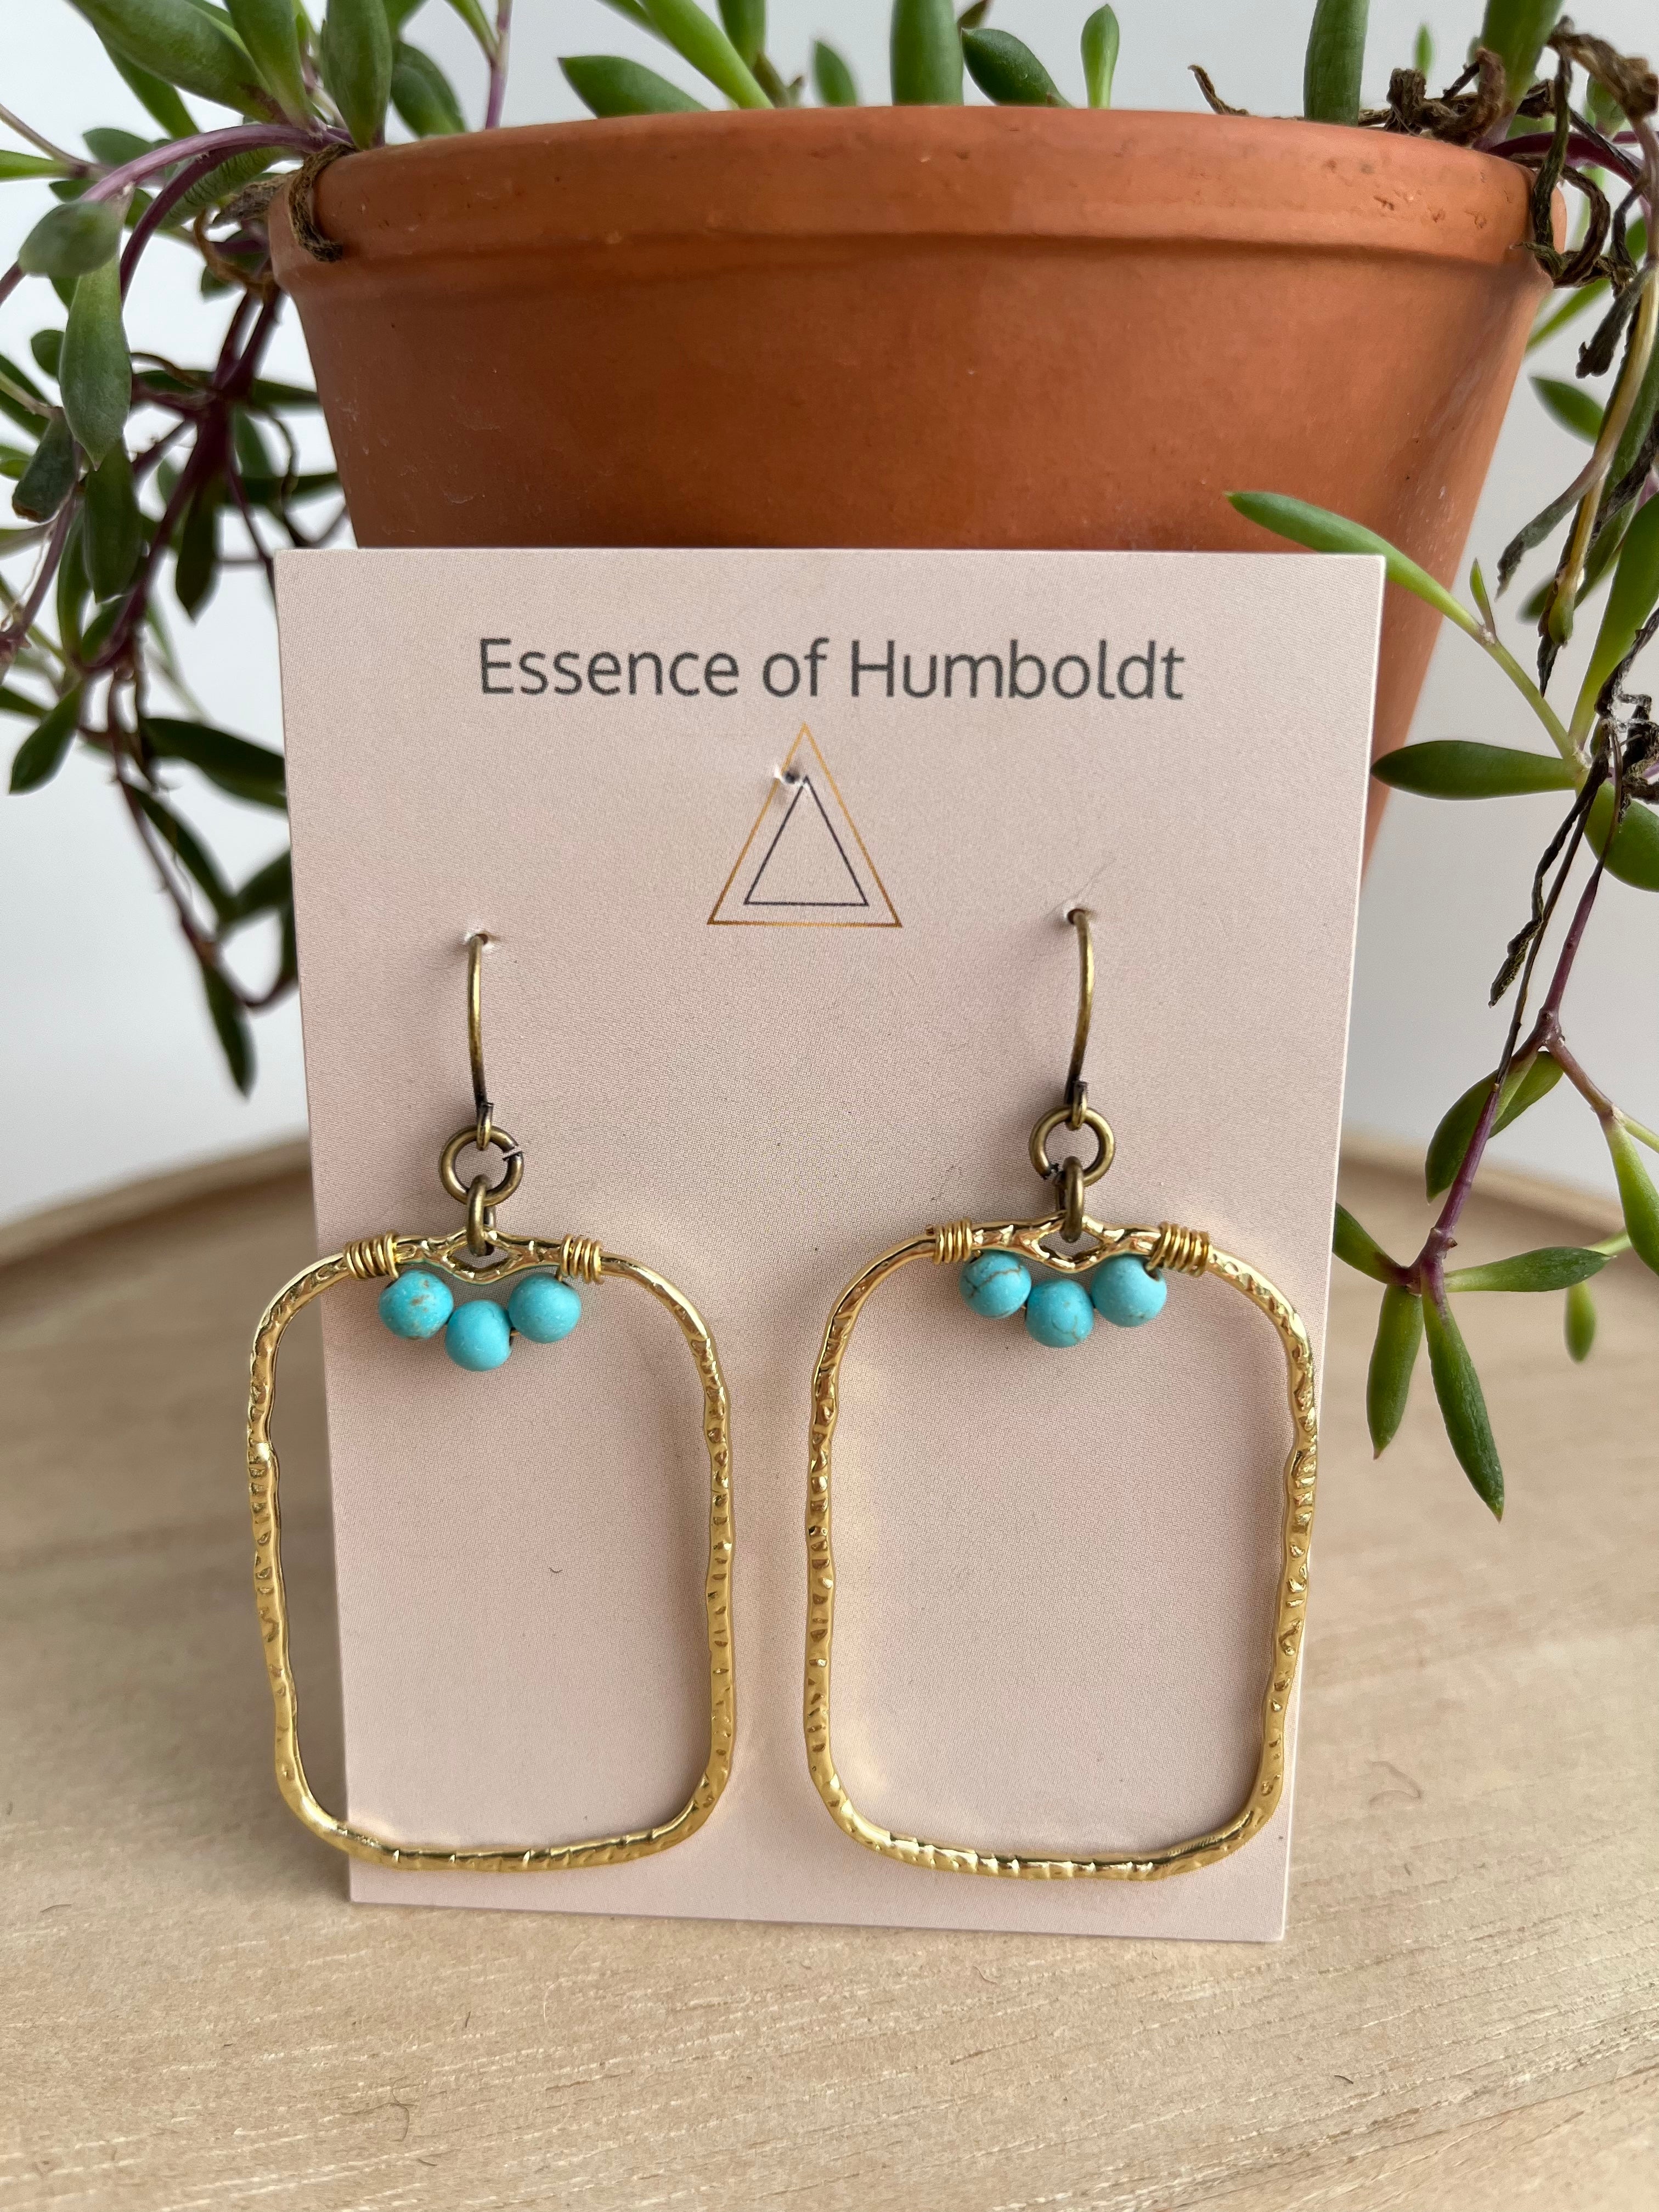 Rectangle Hoops with turquoise beads - earrings from Essence of Humboldt